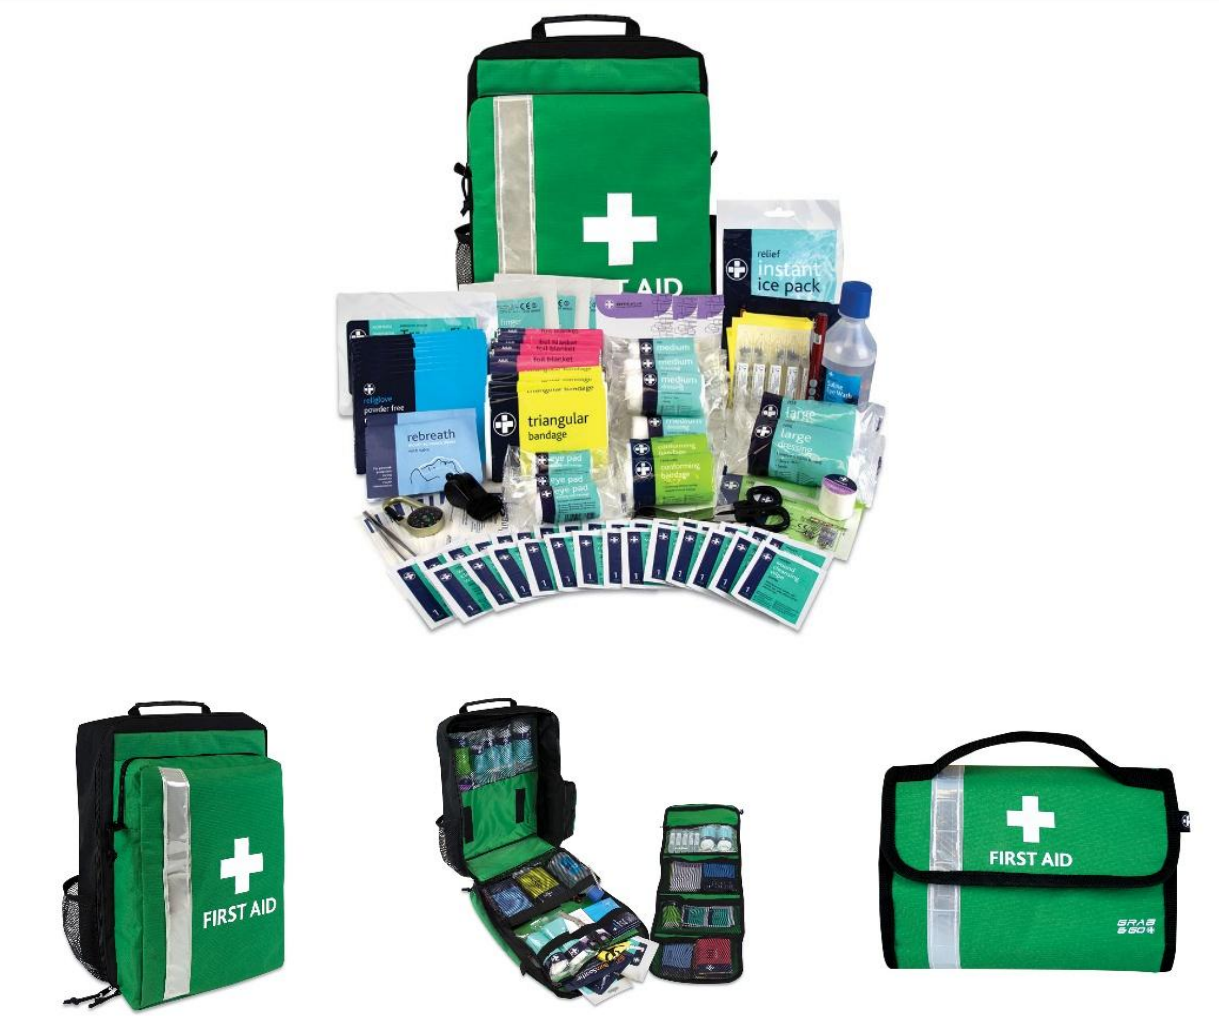 FIRST AID KIT / SCHOOL TRIP KIT 2480 BACKPACK RELIANCE WITH CONTENT